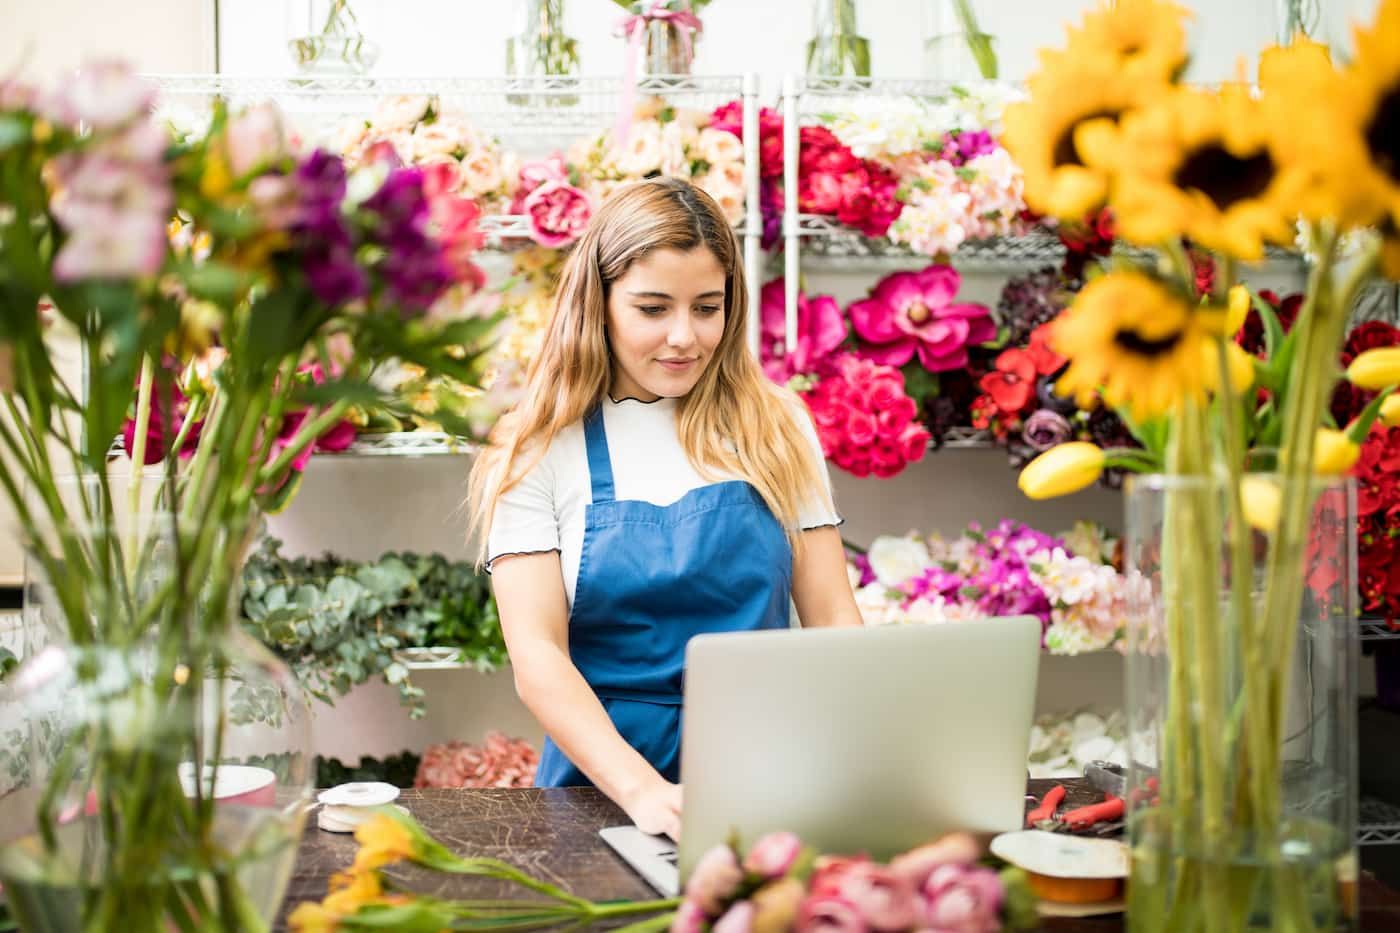 How To Start A Flower Business In 10 Steps